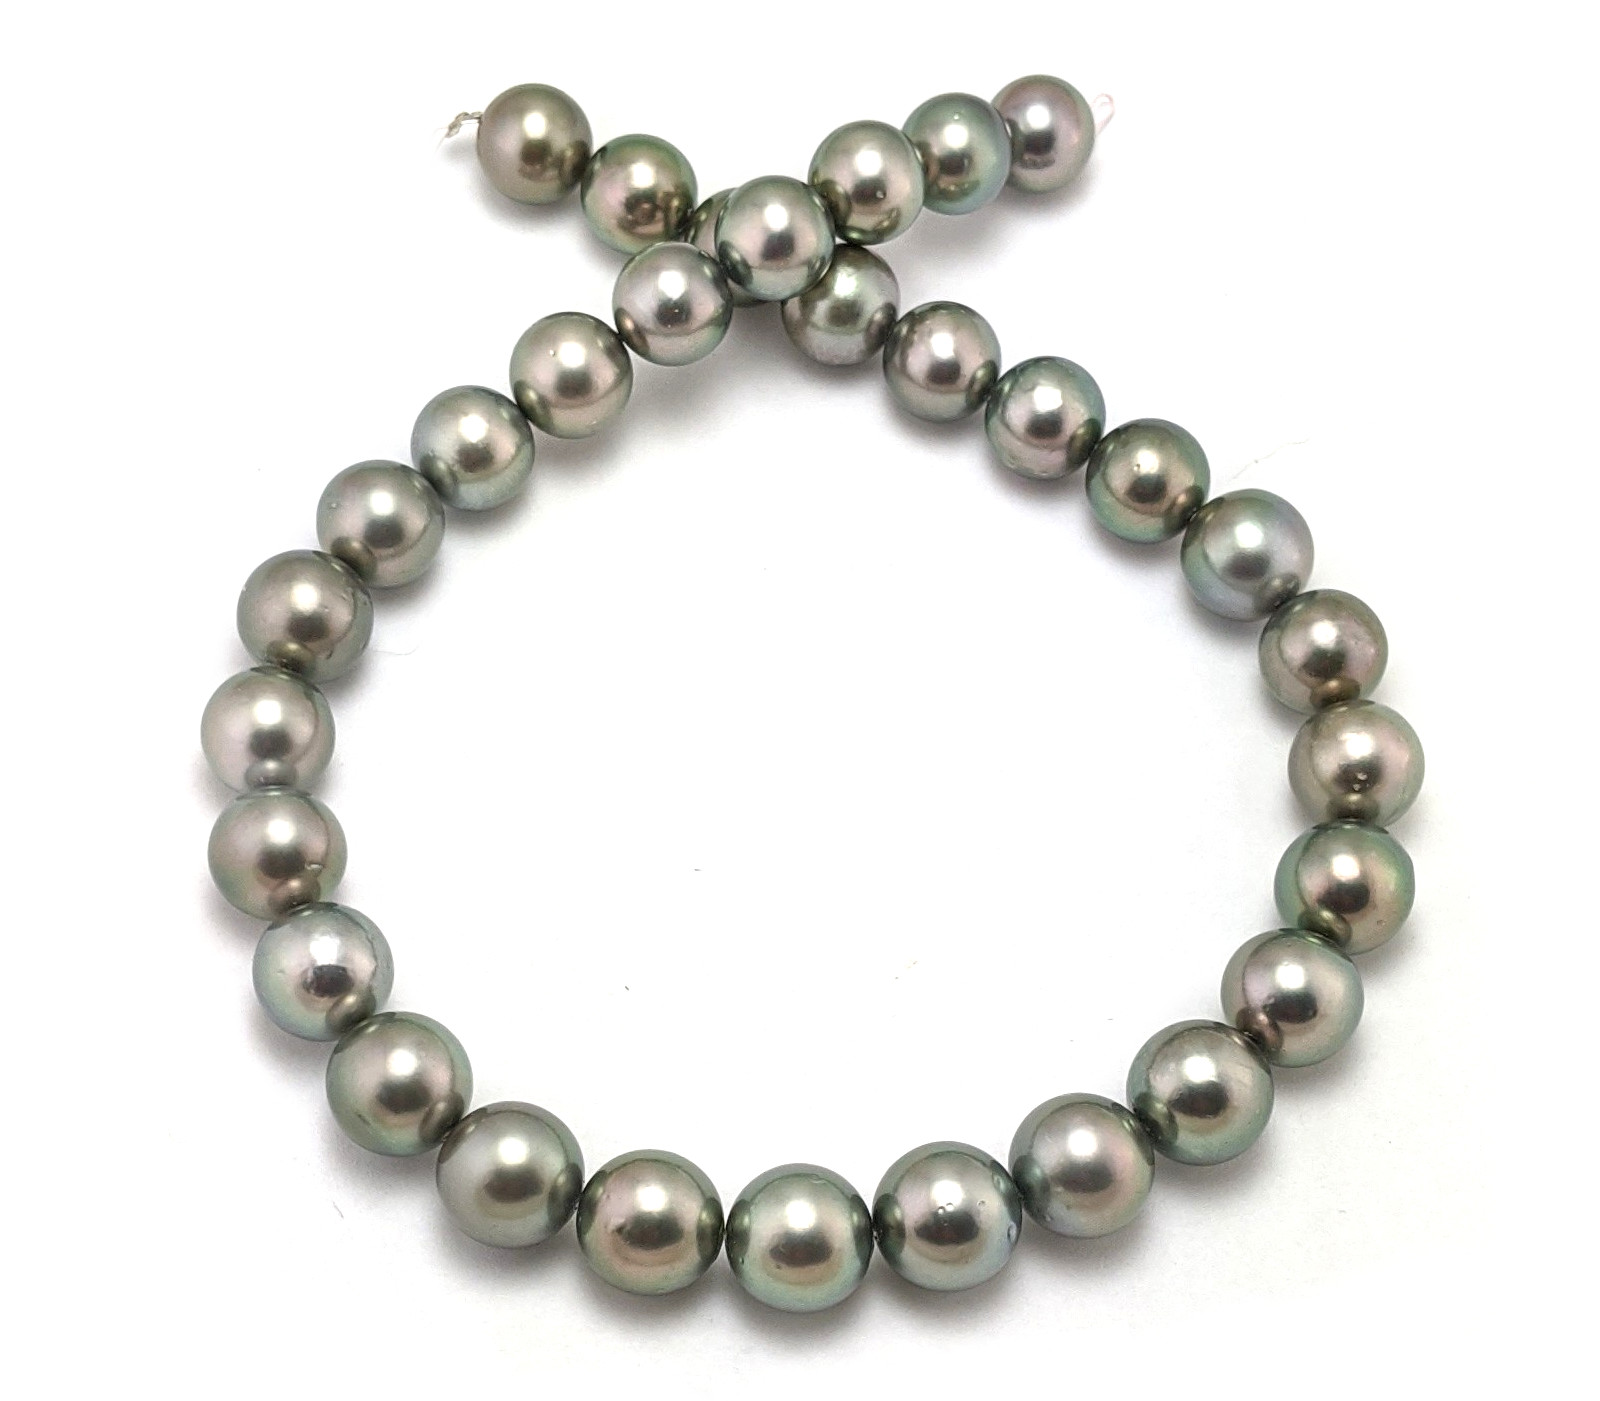 Round Tahitian Pearl Necklace with Medium Peacock Gray Tahitian Pearls